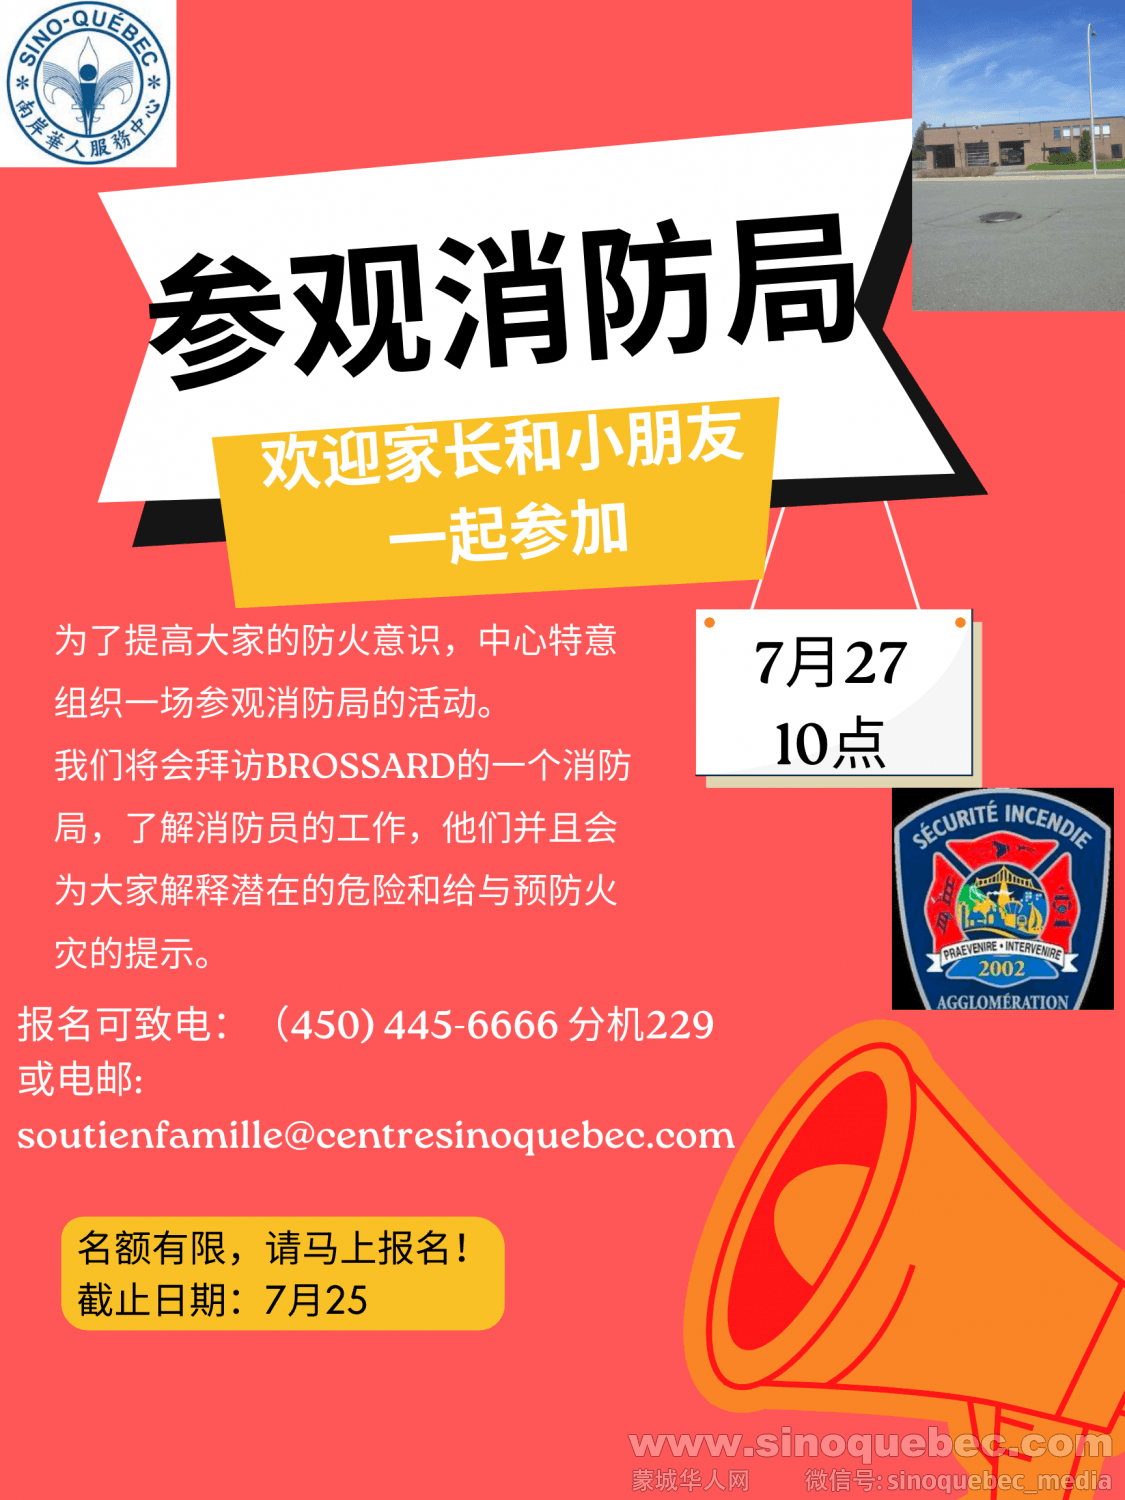 Firefighters Station Poster.png